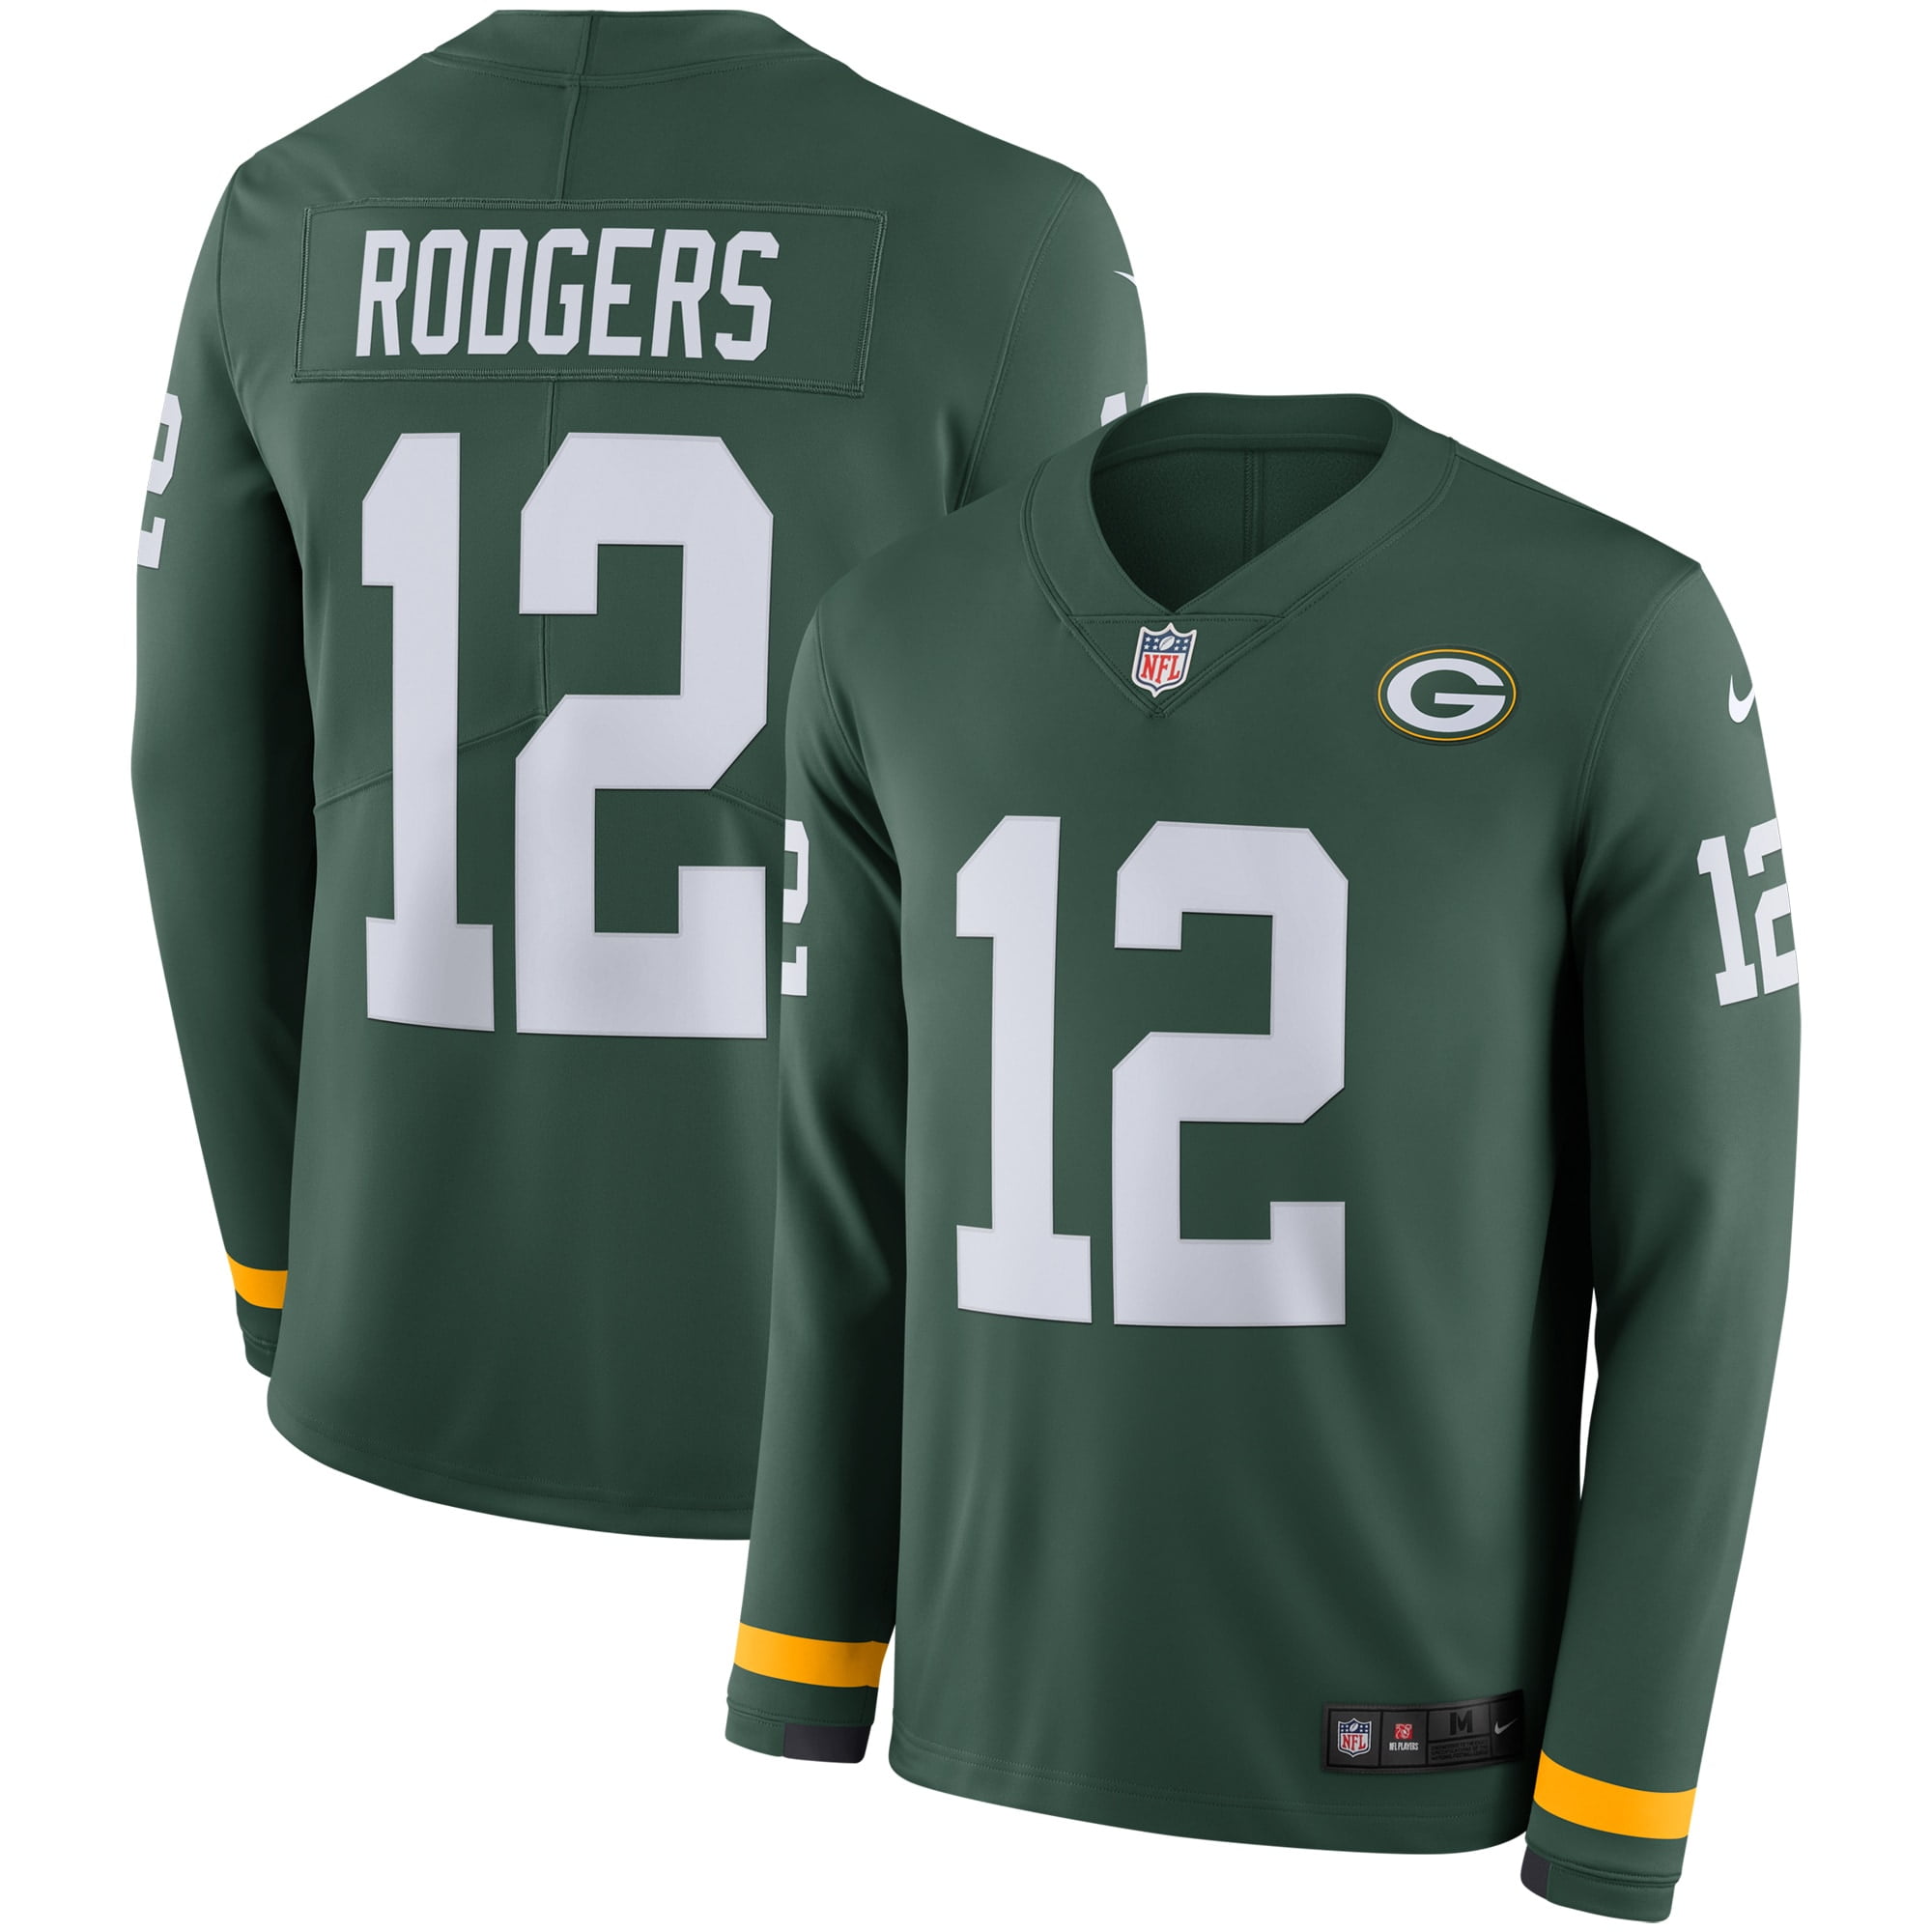 packers long sleeve jersey